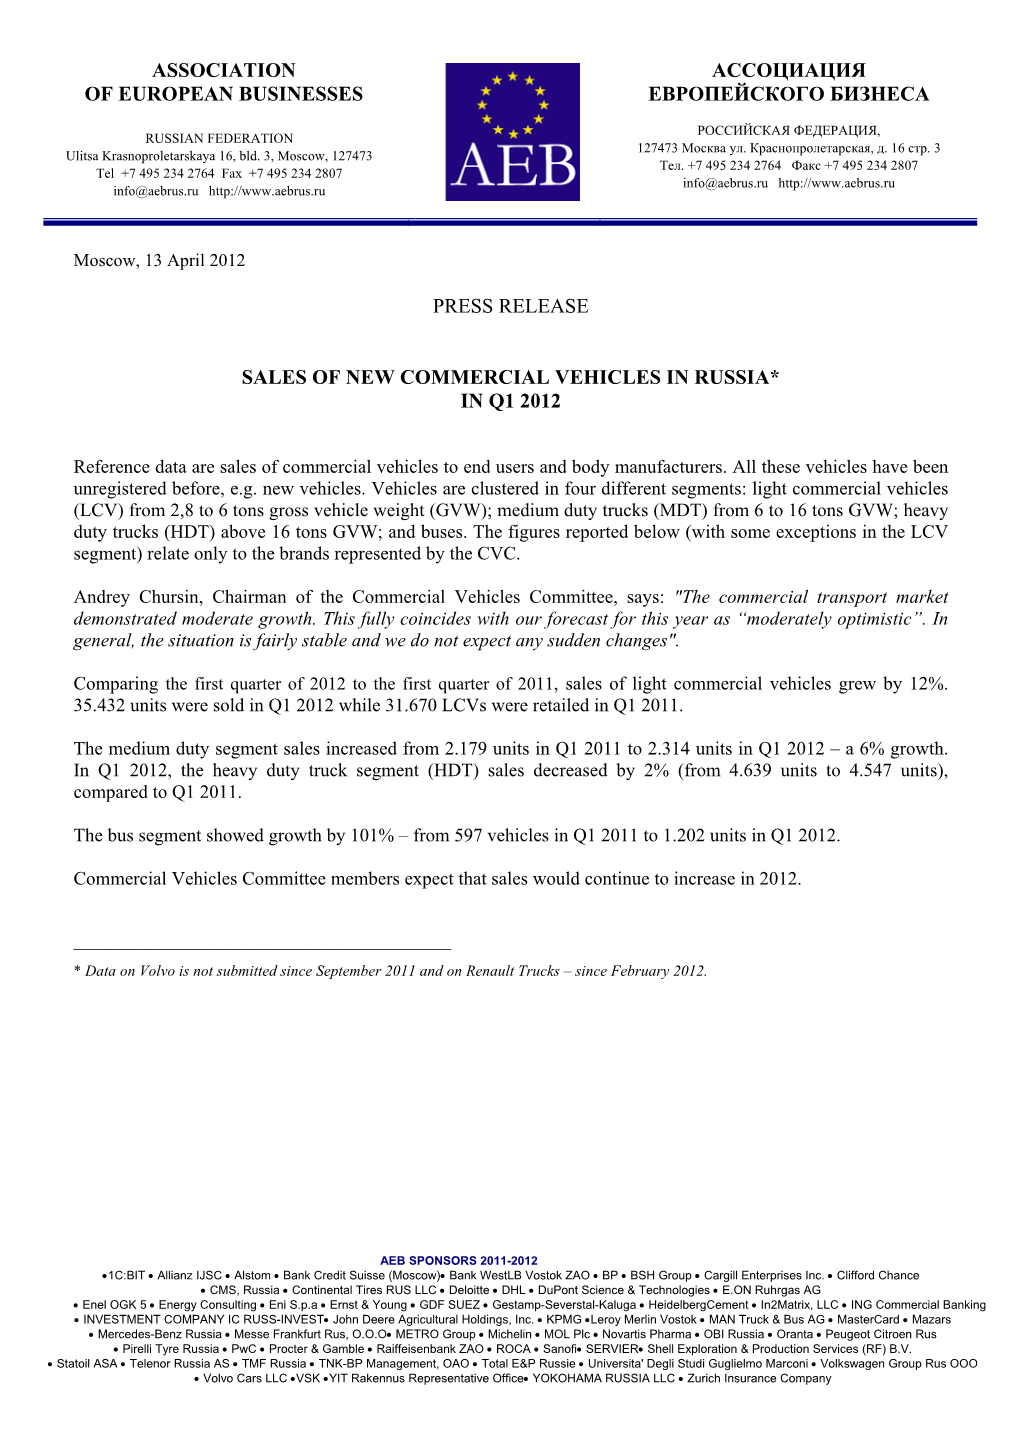 Press Release Sales of New Commercial Vehicles In